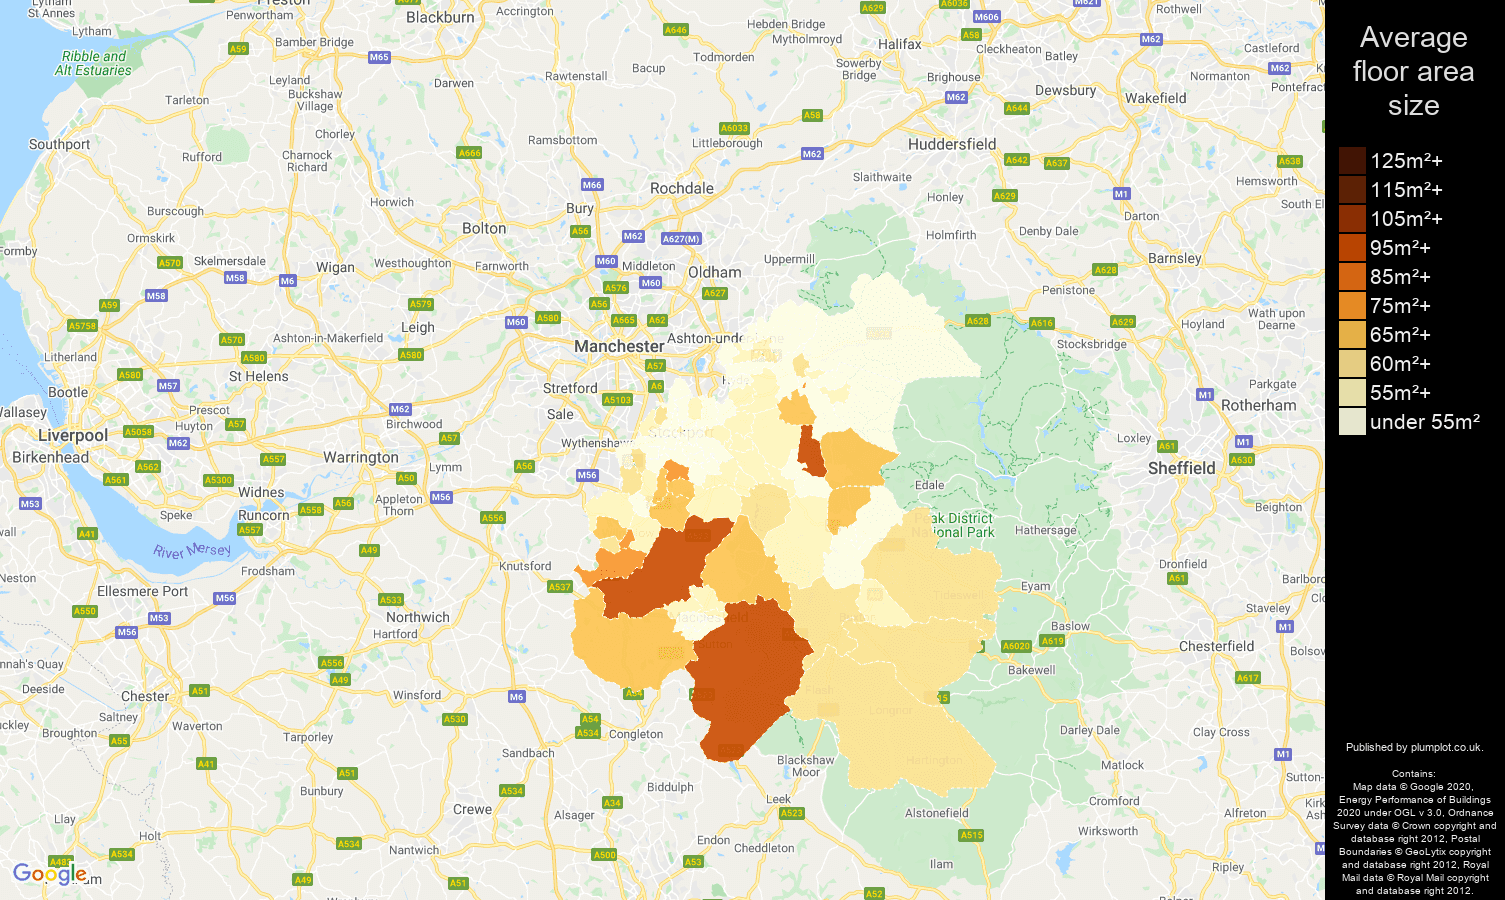 Stockport map of average floor area size of flats